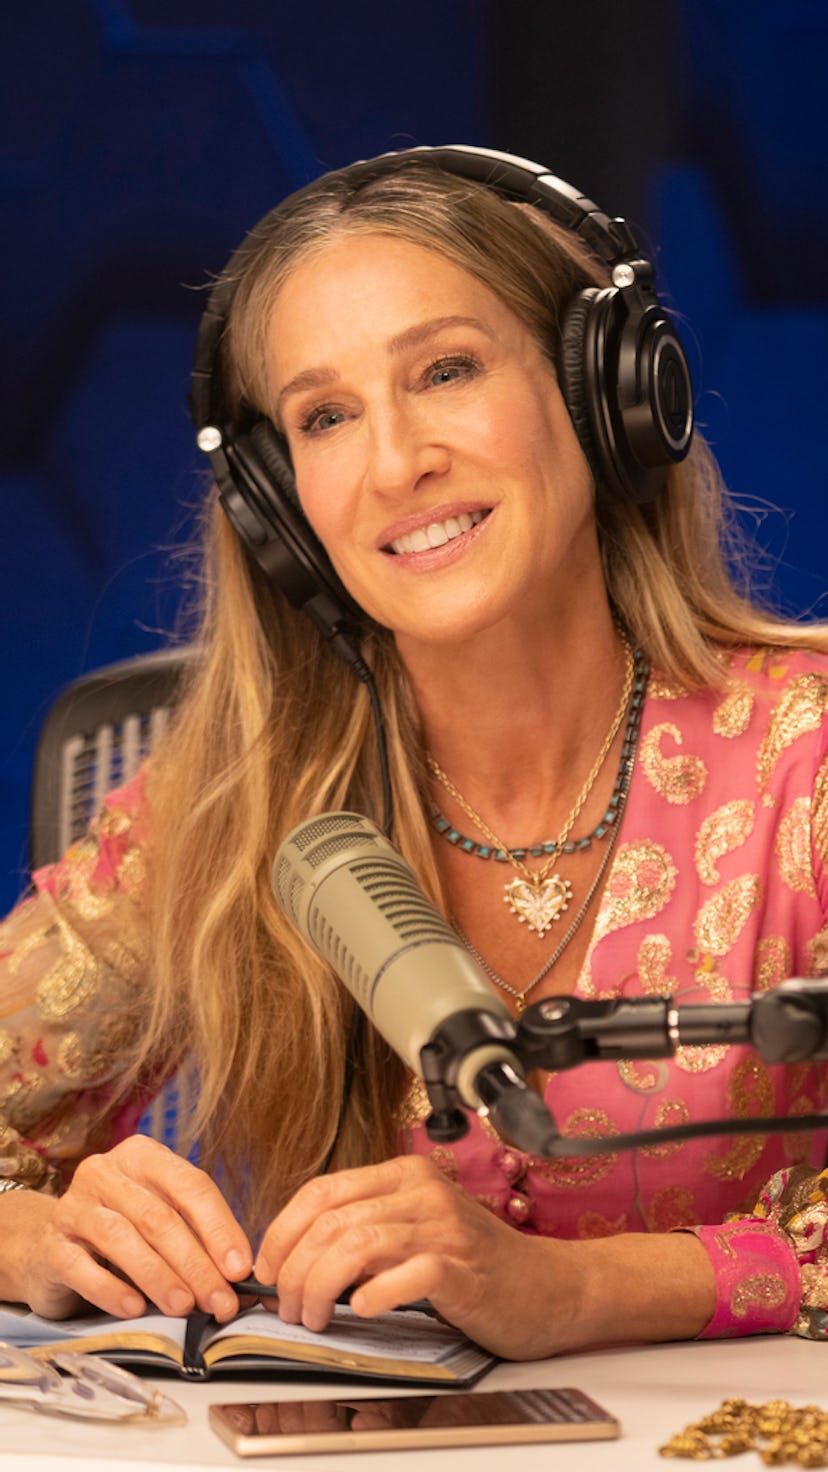 Sarah Jessica Parker as Carrie Bradshaw hosting her own podcast on "And Just Like That" episode 10.